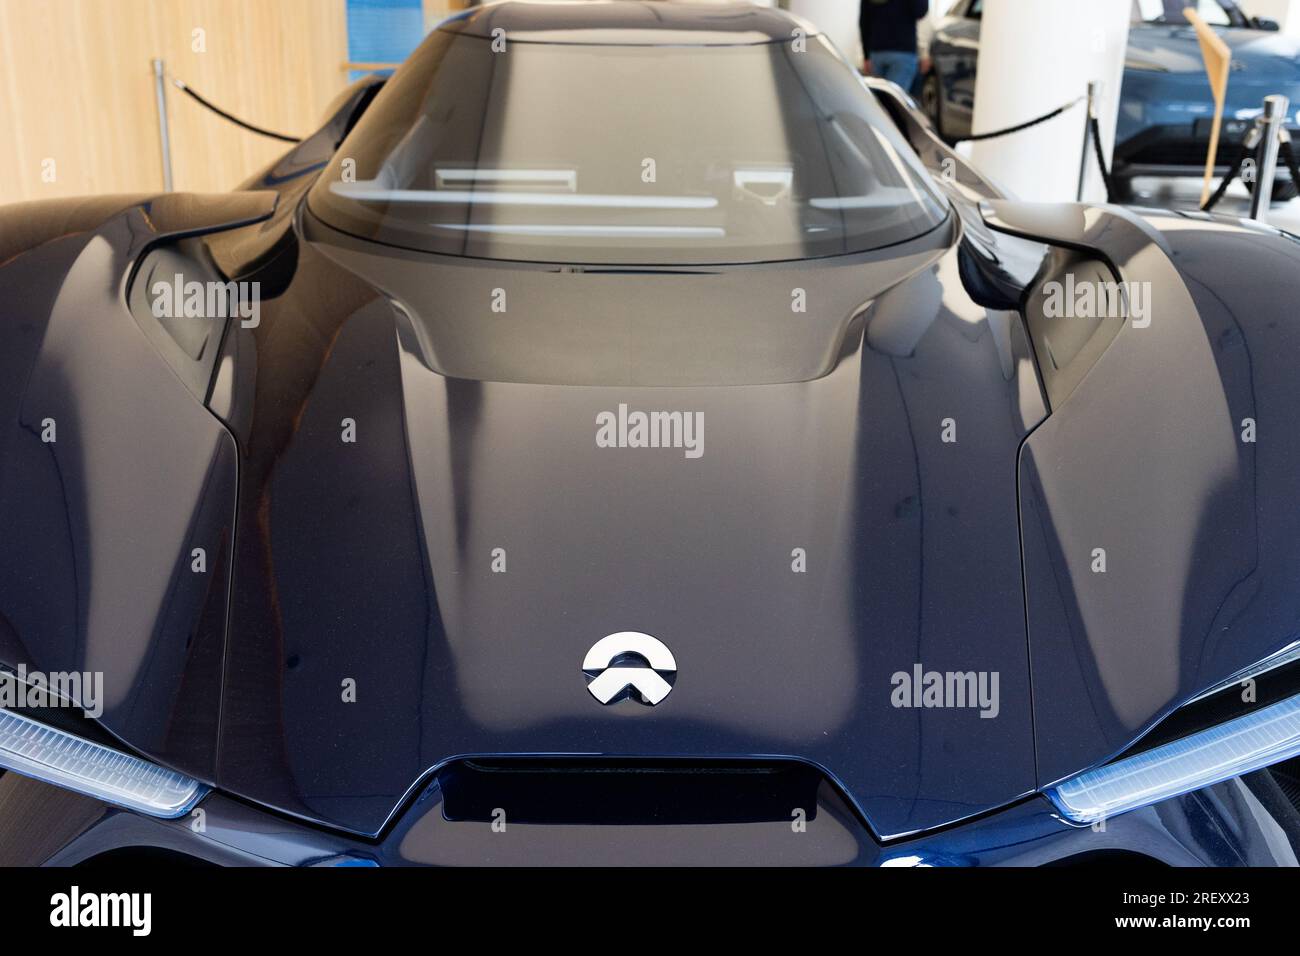 Oslo, Norway. July 27th, 2023. The NIO EP9 electric supercar pictured at a showroom in Oslo, Norway. Six EP9s have been sold to NIO investors for £2.5 million each. Credit: Katie Collins/Alamy Stock Photo